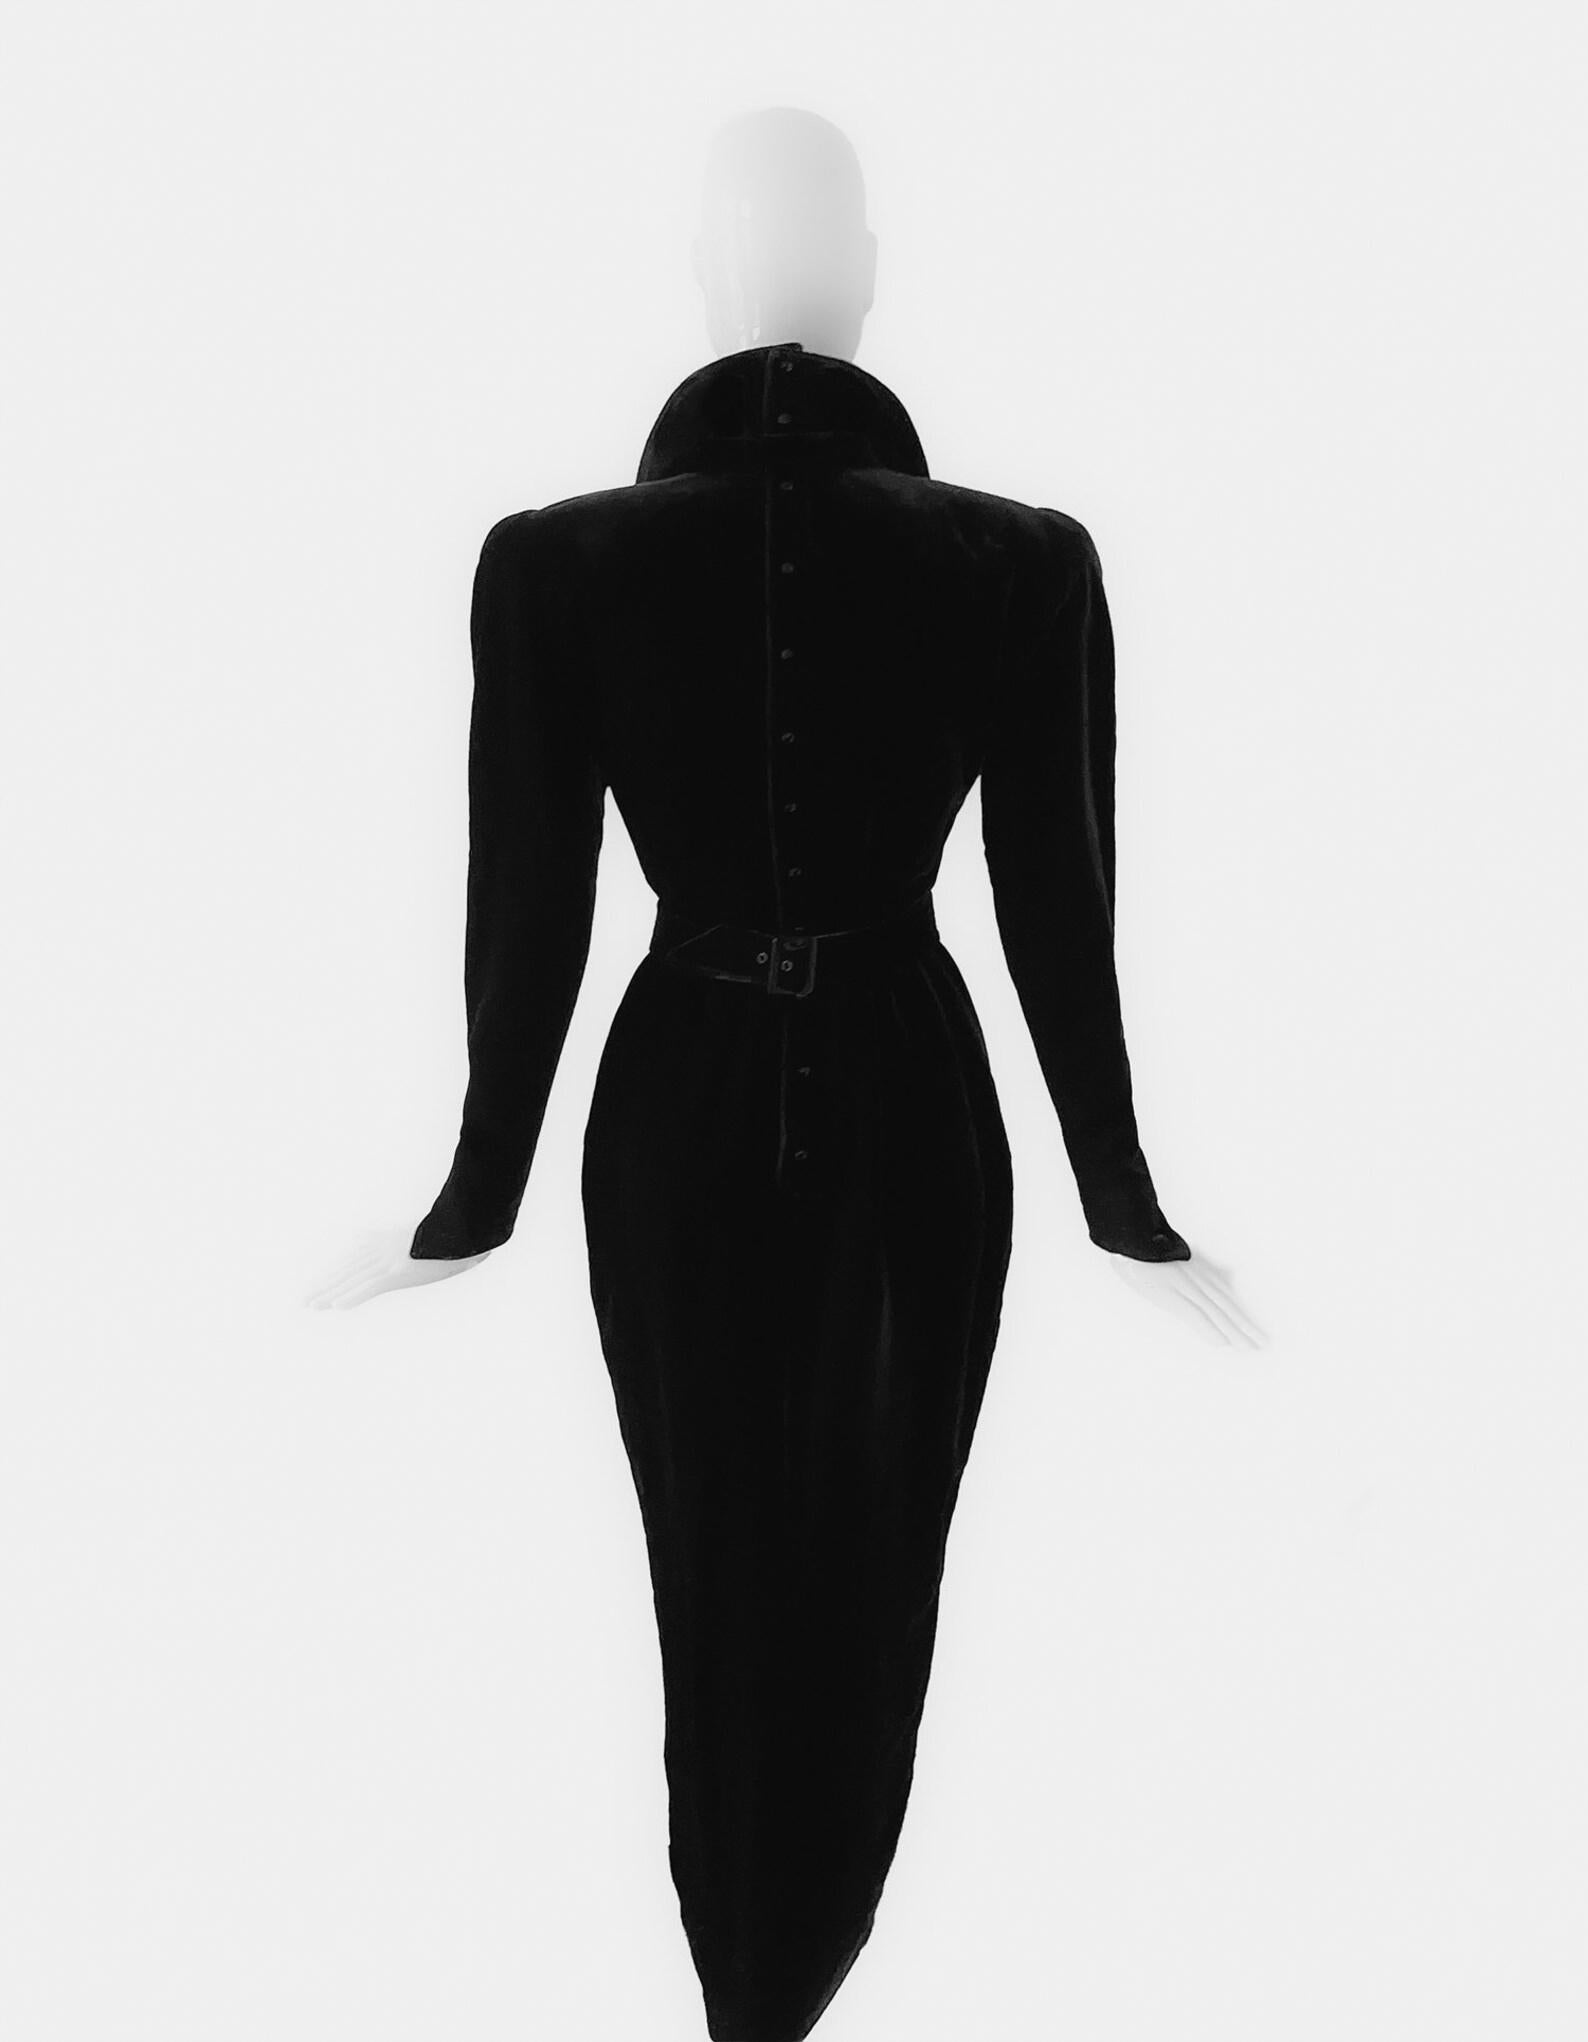 Stunning Thierry Mugler Archival  FW 1986 Evening Gown Crytsal Black Dress  For Sale 11